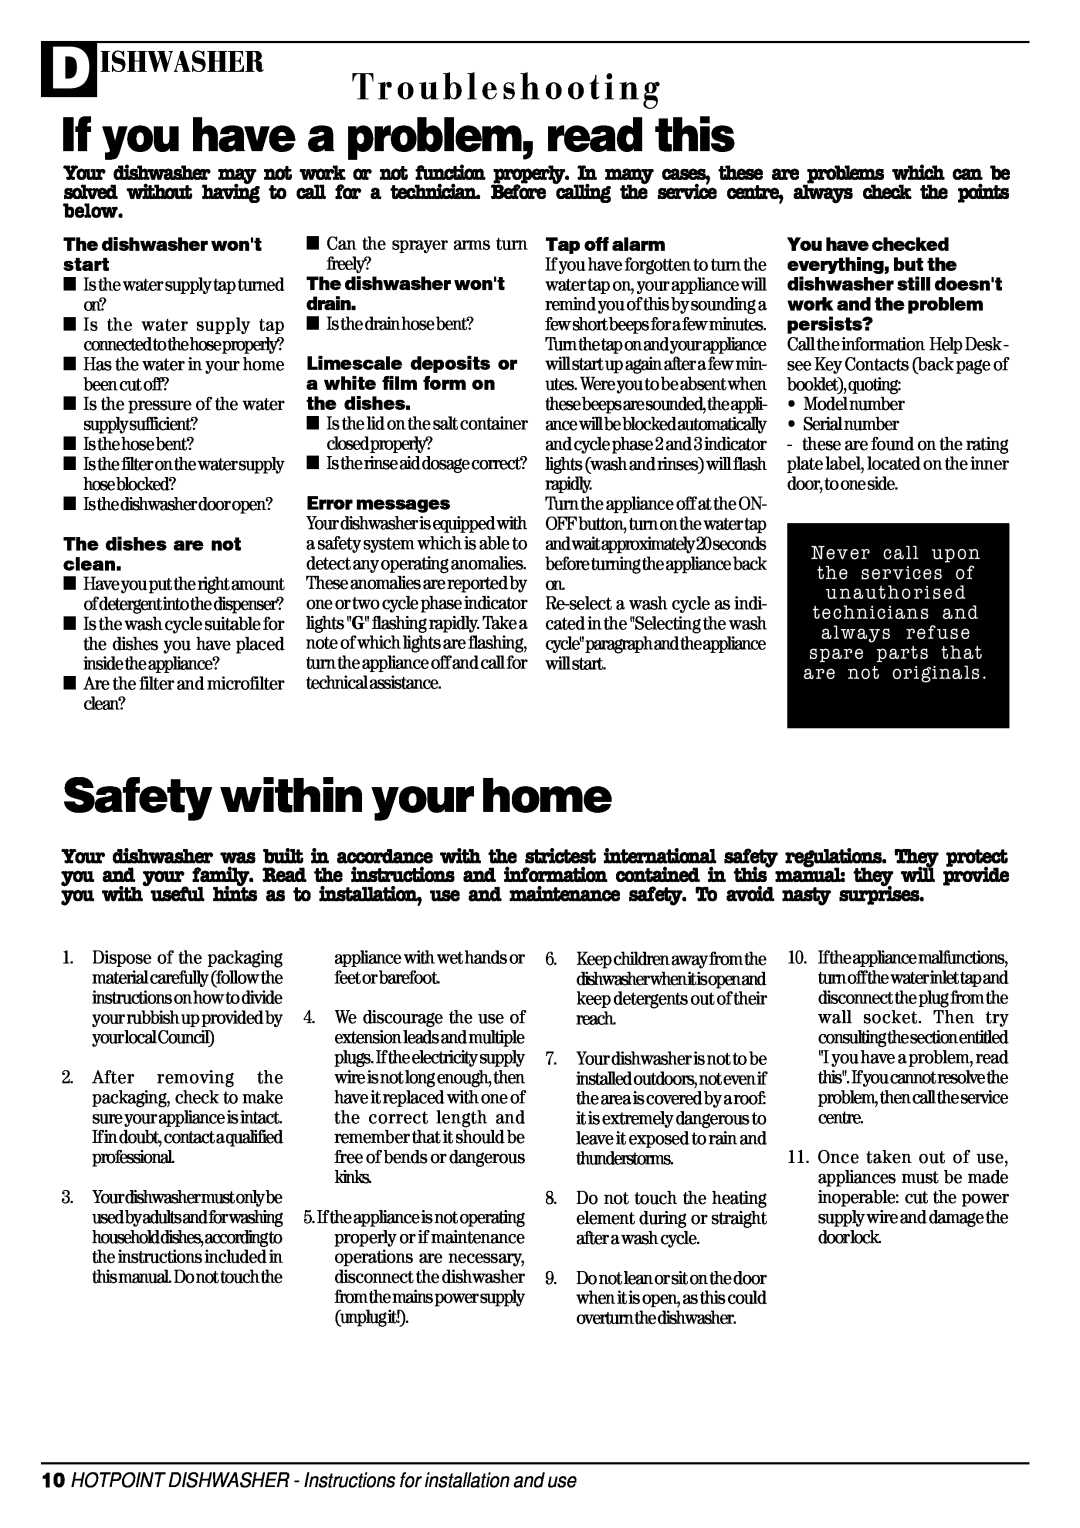 Hotpoint DC 28 If you have a problem, read this, Safety within your home, Troubleshooting, D Ishwasher, Error messages 